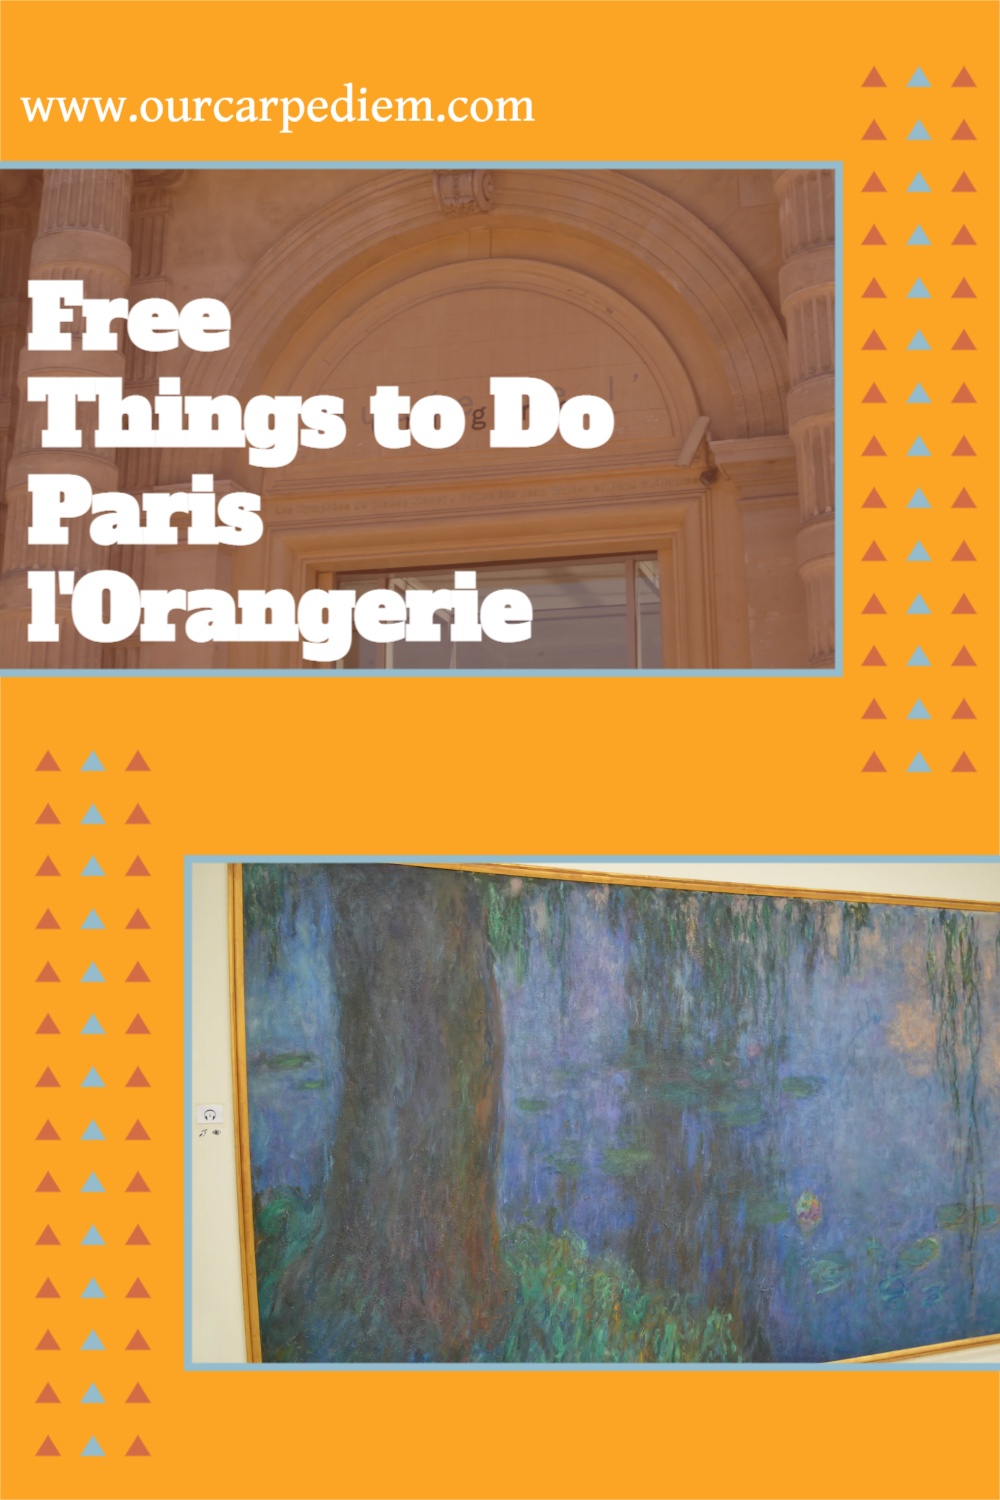 How to visit Musee de l'Orangerie (and other Paris museums) for free. Imagine, you finally made it to Paris, but you have a budget. You want to see art, but you also want to save money. Top tips to get into l'Orangerie and other Paris museums for free. Must-see in Paris! Monet ‘s water lilies. Paris travel tips. You too can see Monet for free! #OurCarpeDiem #freebies #travel #paris #monet #art #traveltips #france #savemoney #Orangerie